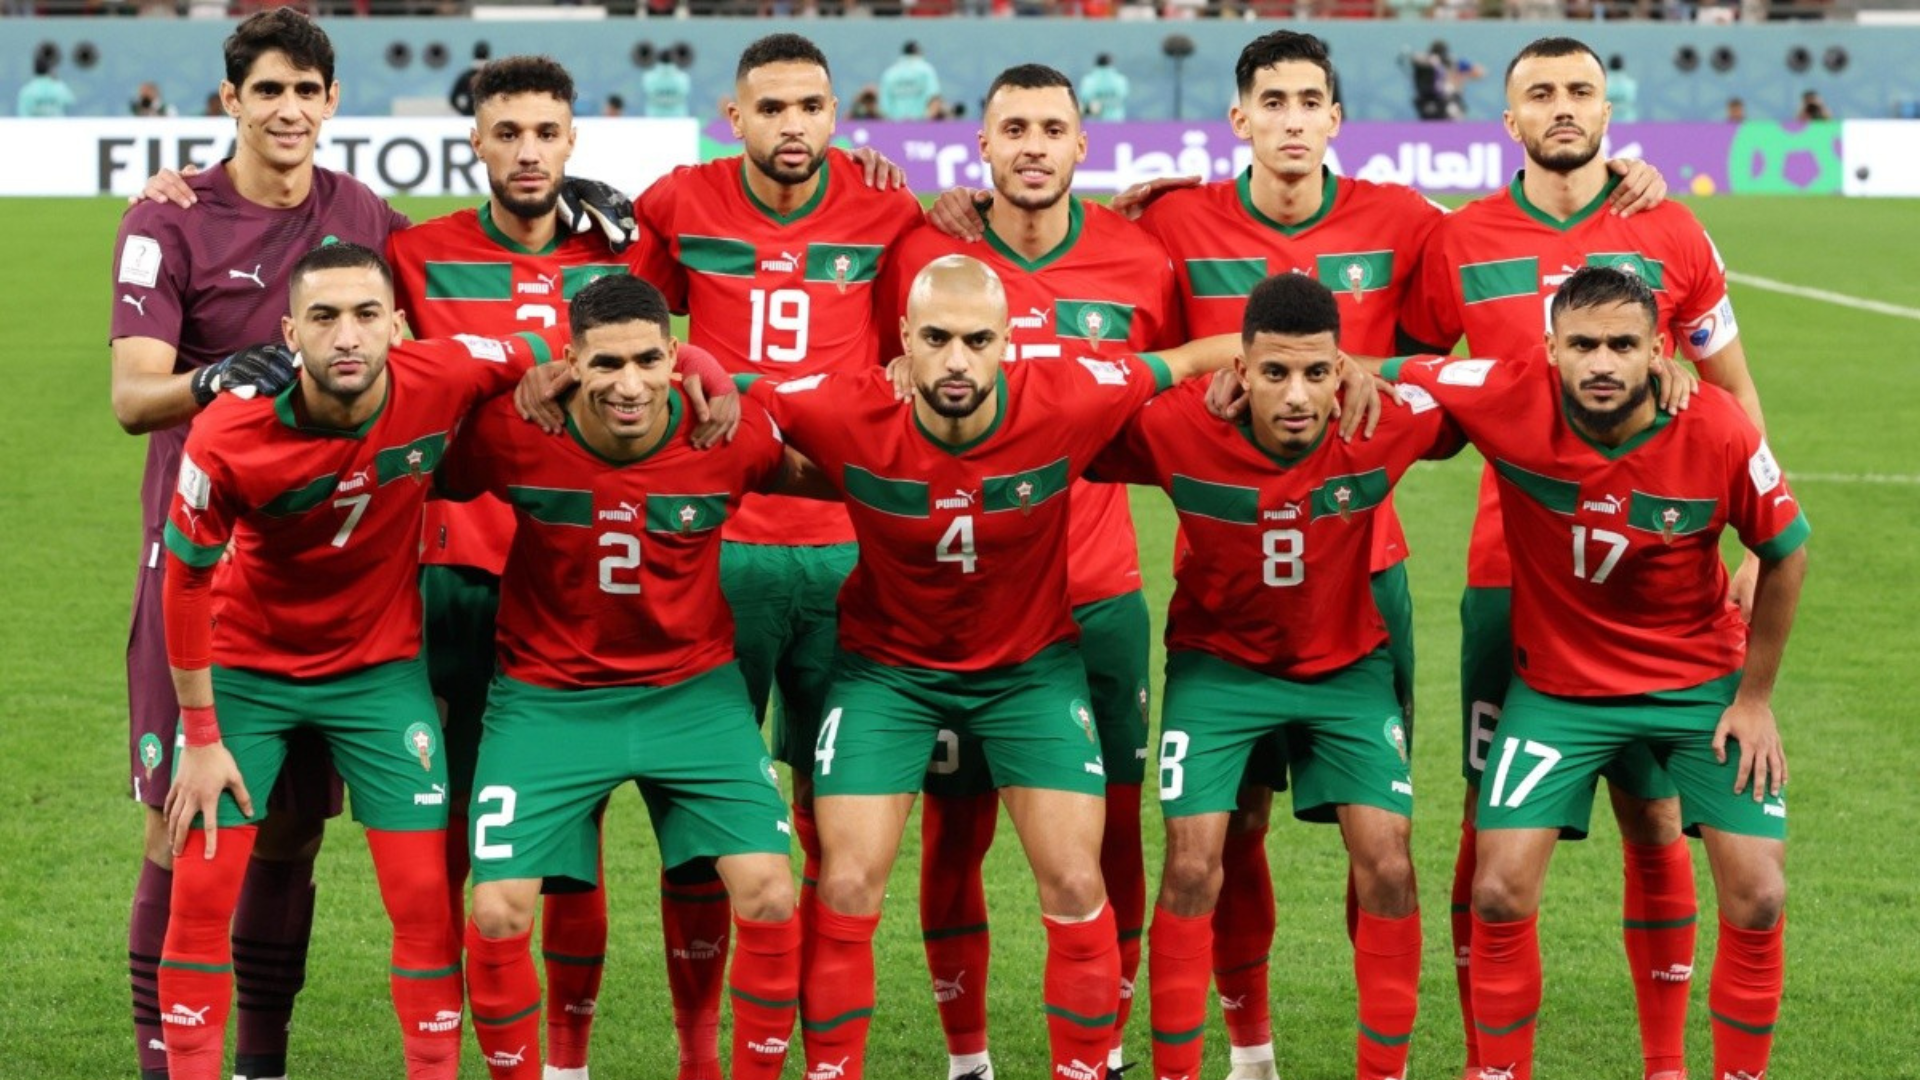 Peru will face Morocco with all its figures that shone in the Qatar 2022 World Cup.